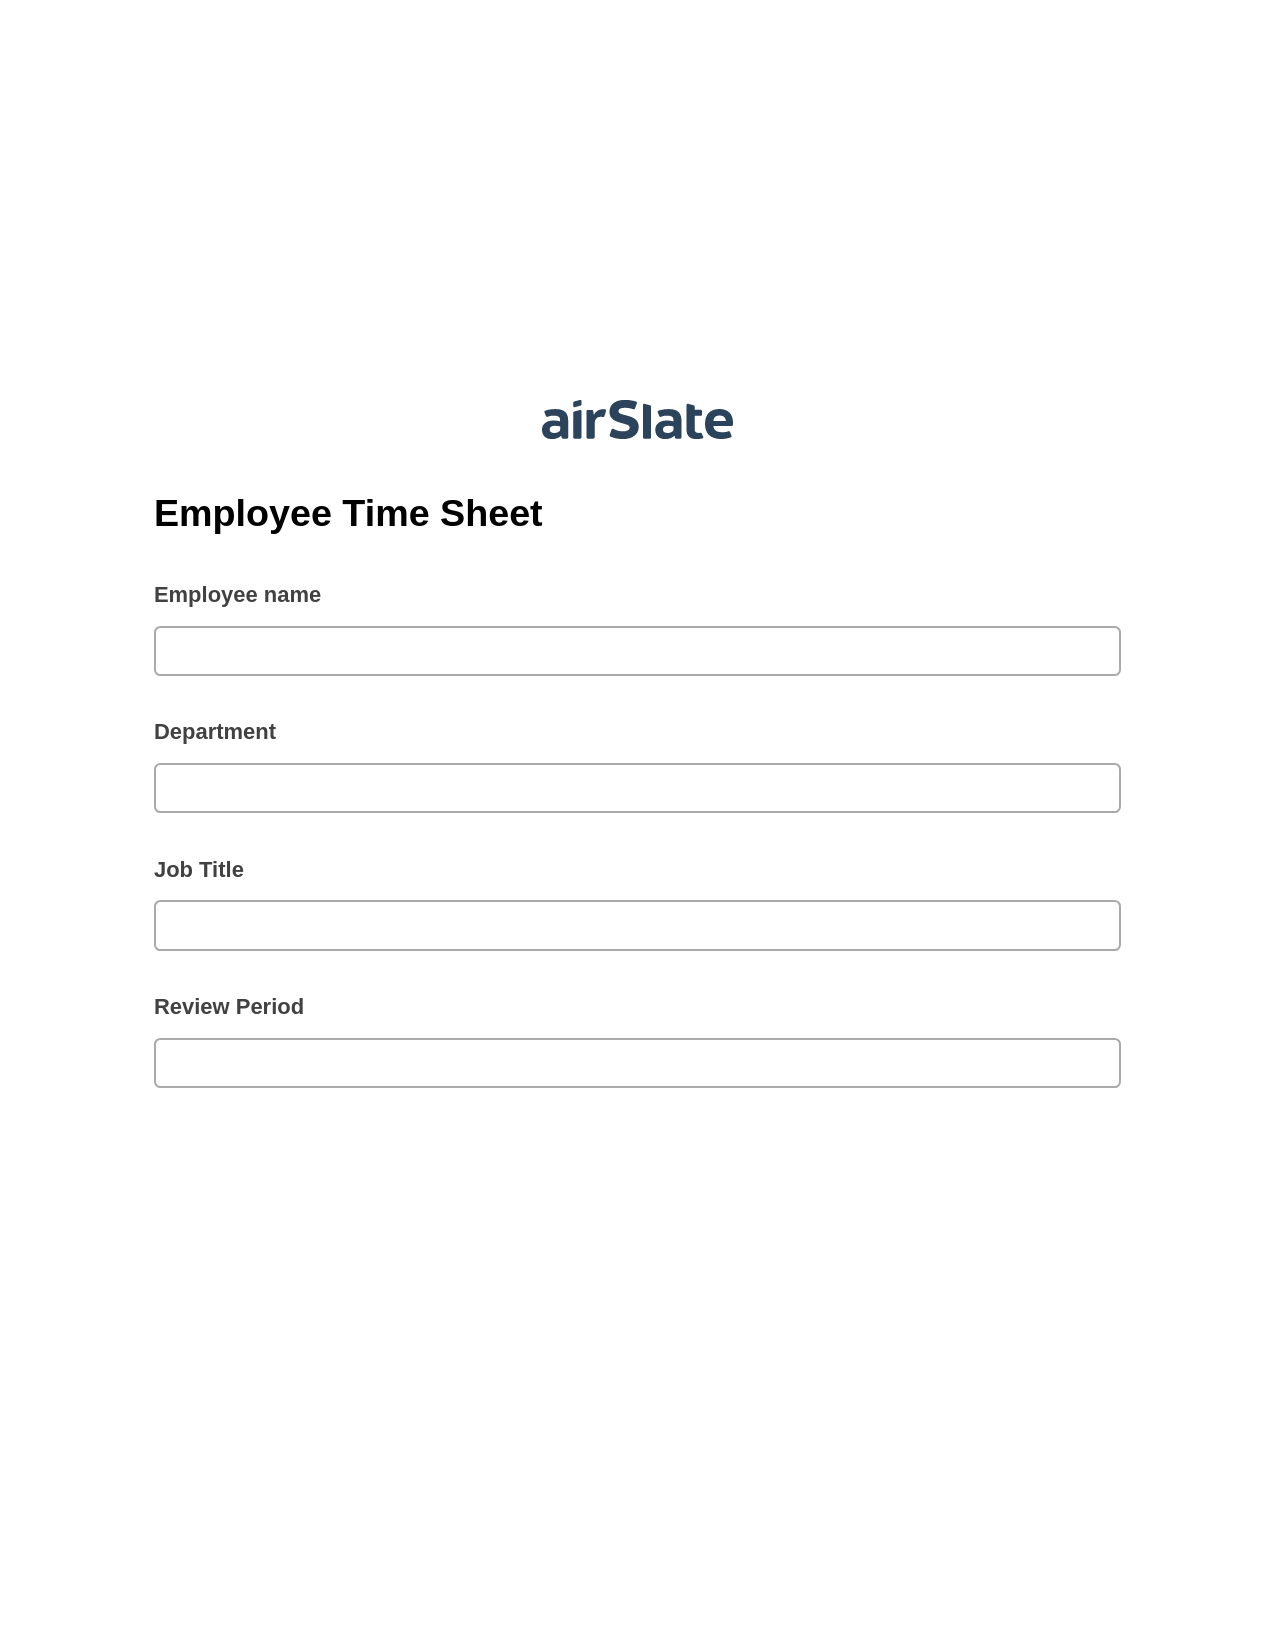 Multirole Employee Time Sheet Pre-fill from Google Sheets Bot, Create slate addon, Archive to Google Drive Bot